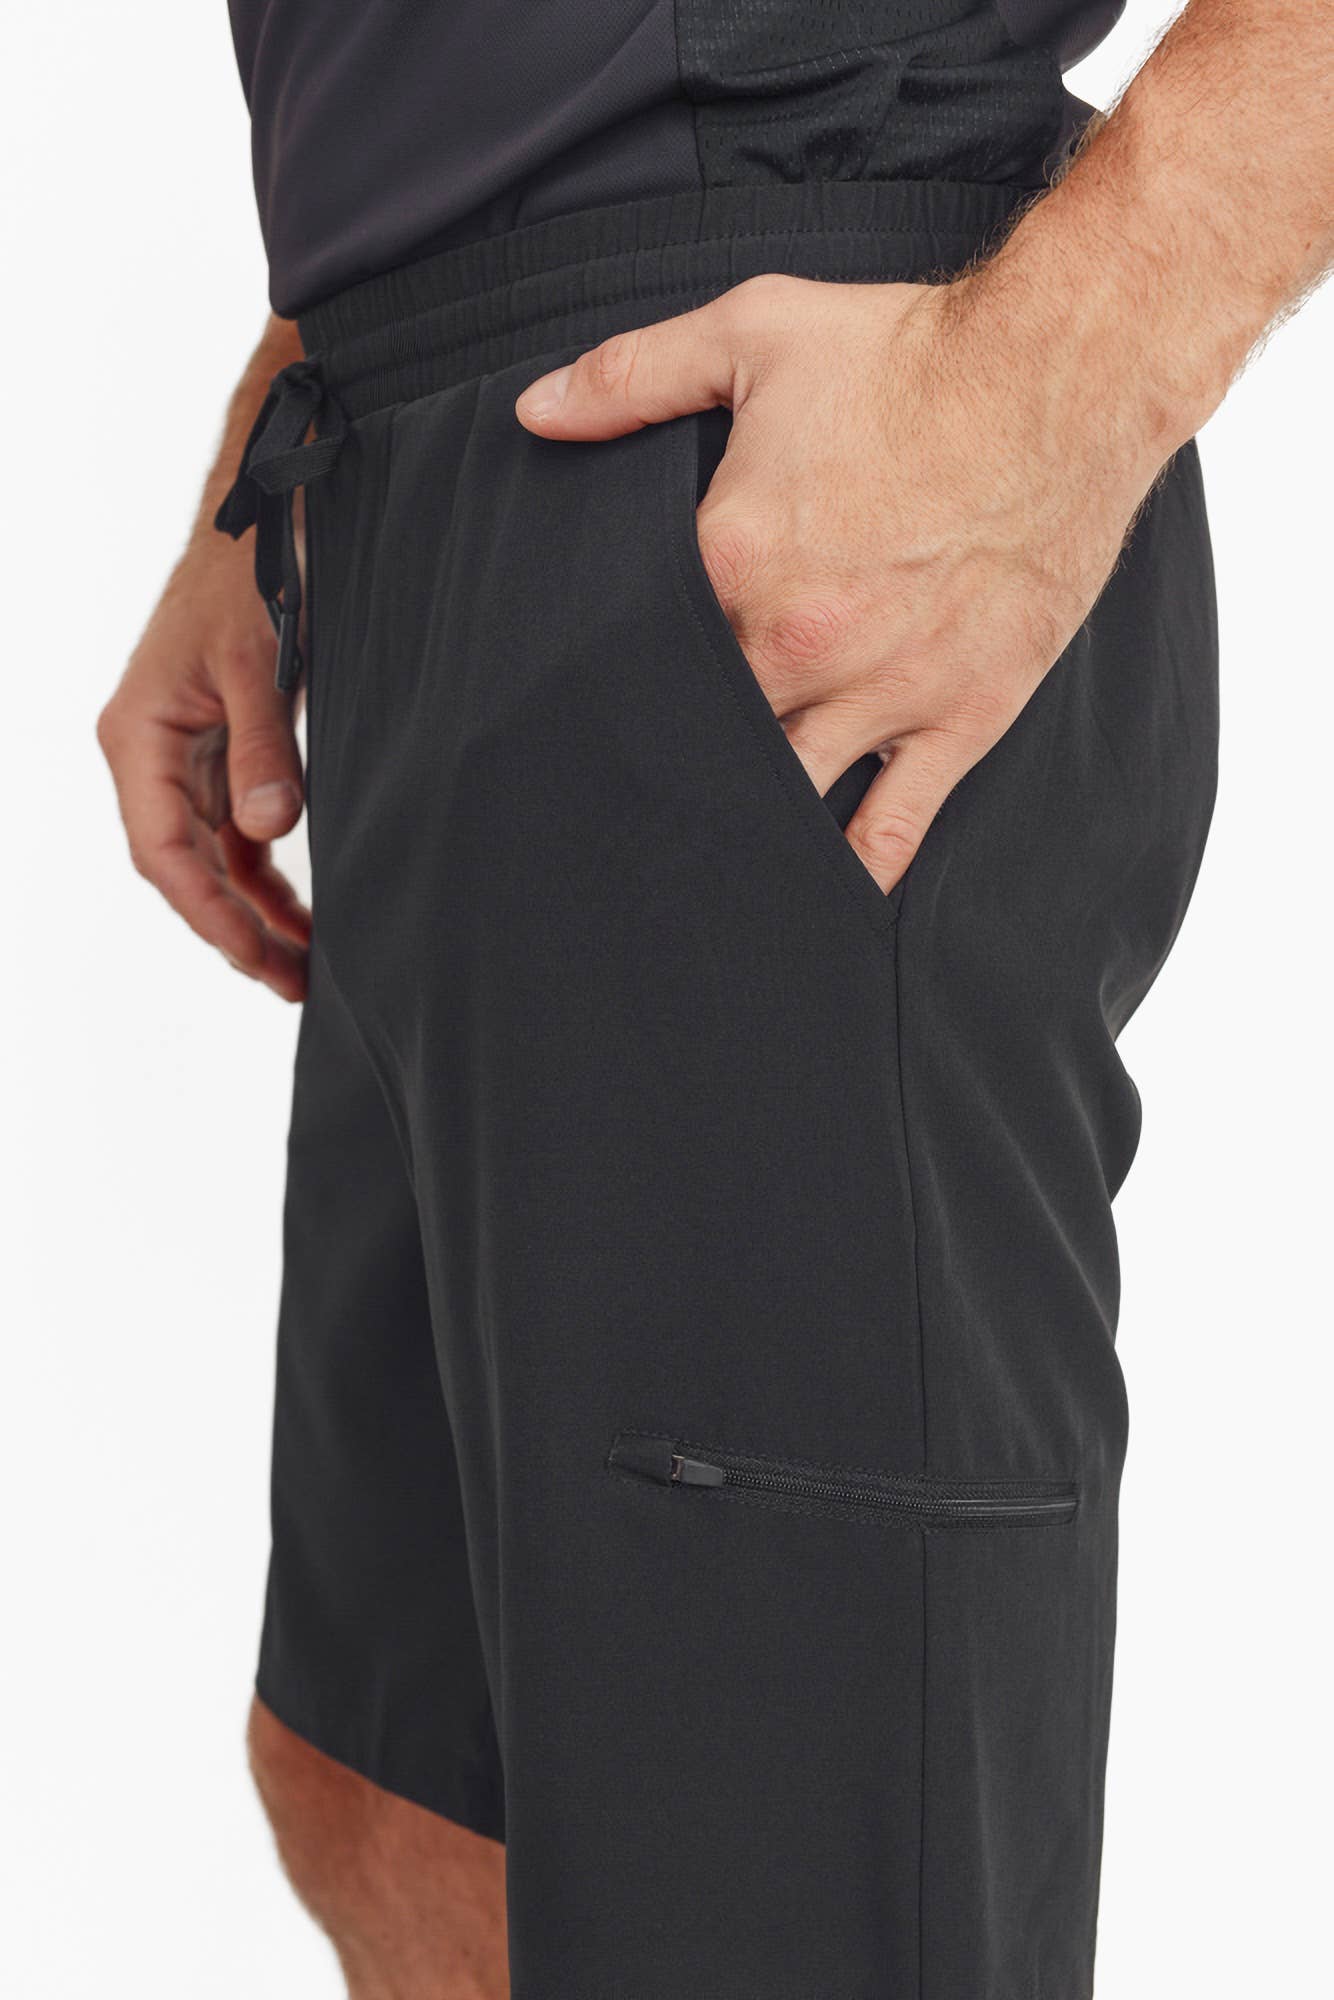 MEN - Active Drawstring Shorts with Zippered Pouch: S:M:L:XL (1:2:2:1) / BLACK - Storm and Sky Shoppe